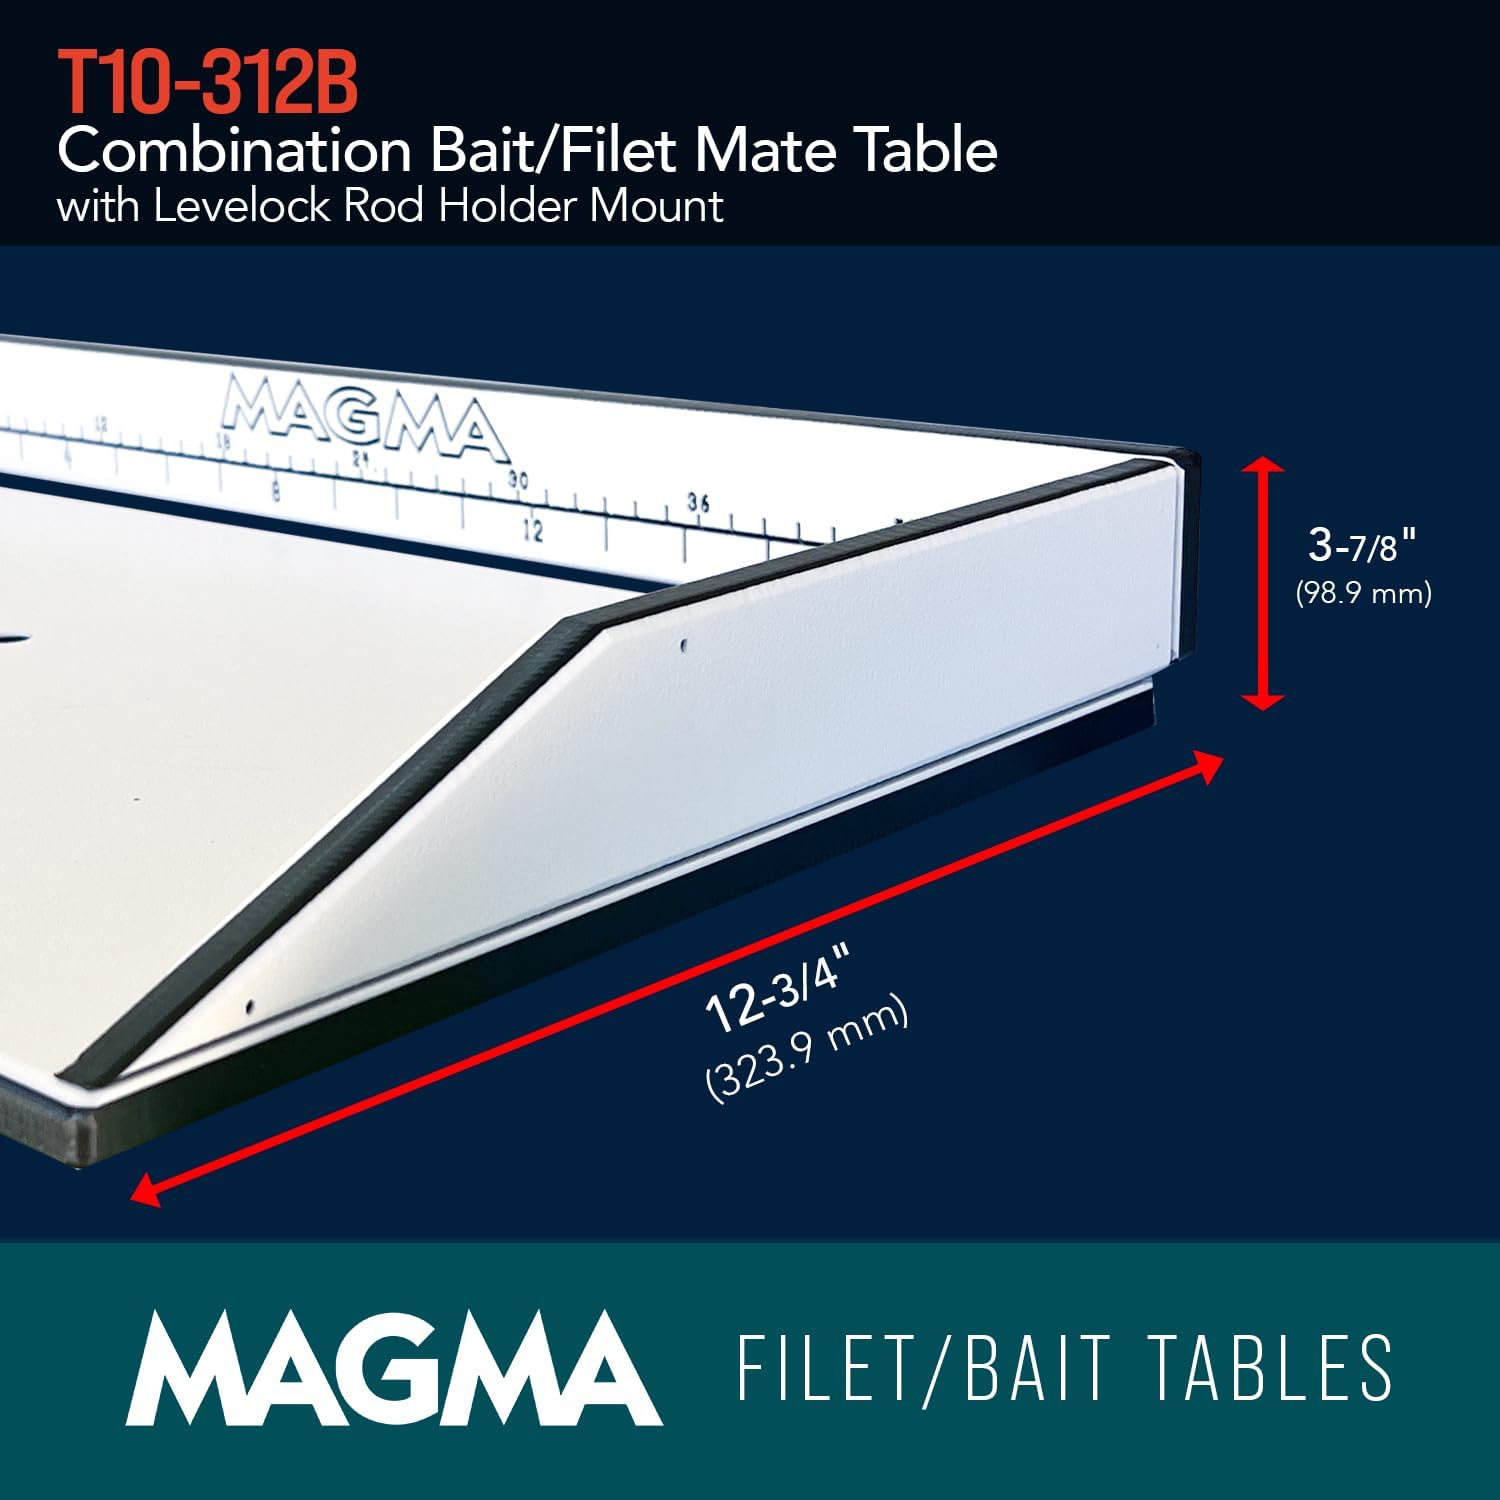 Magma Products, T10-312B Combination Bait/Filet Mate Table with Levelock Rod Holder Mount, 20 Inch x 12-3/4 Inch - Magma Products T10-312B Combination Bait/Filet Mate Table Review